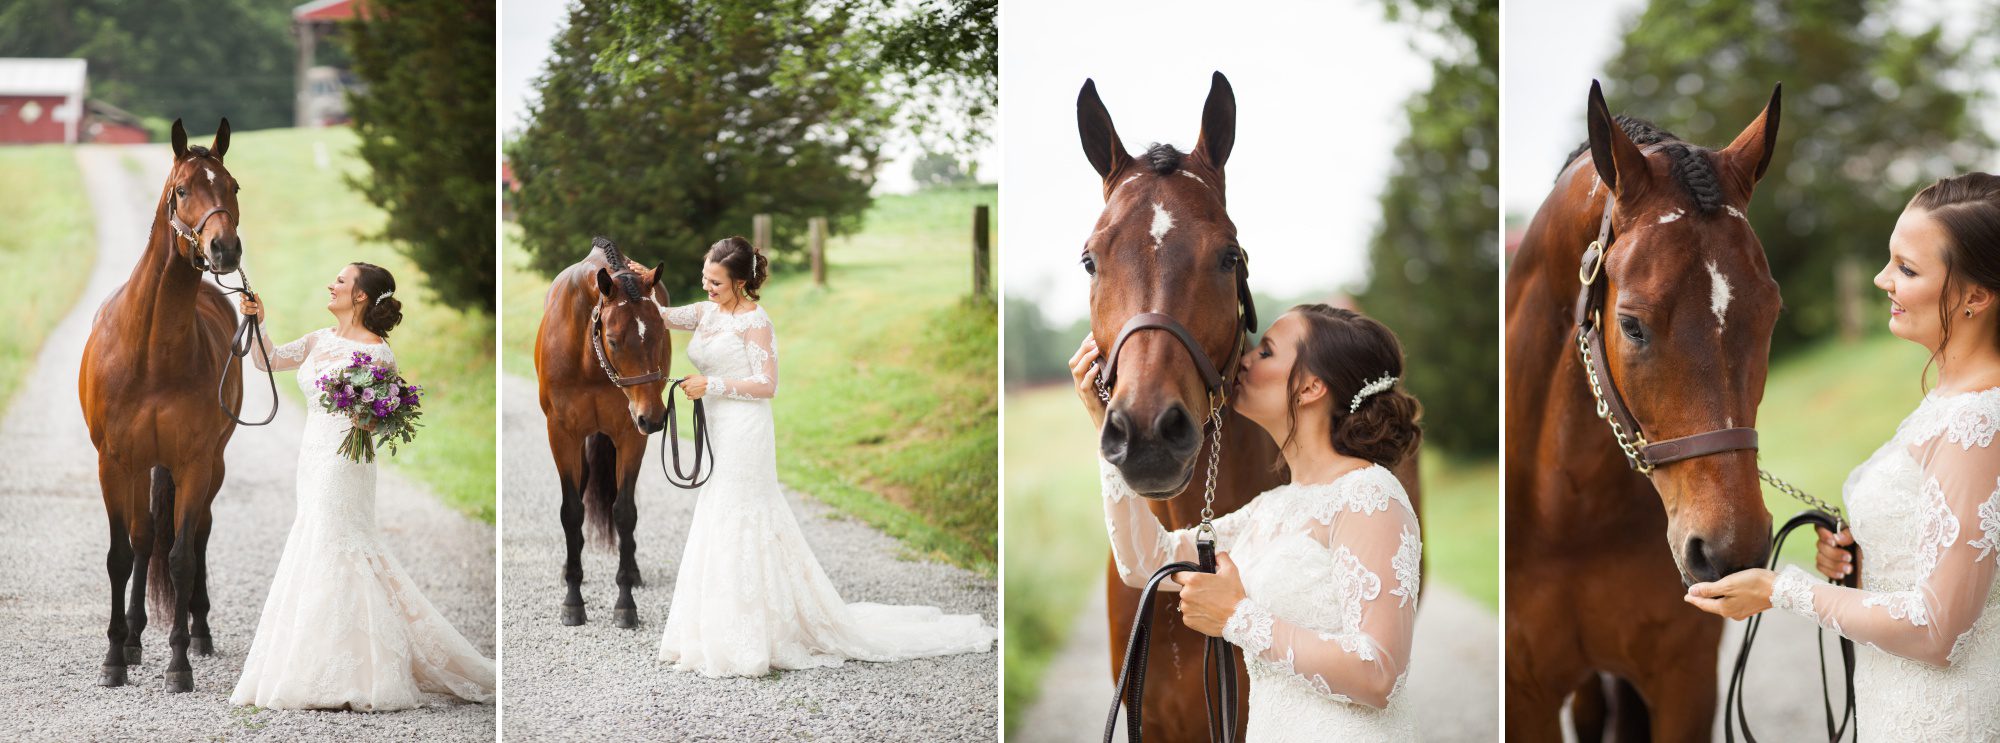 Bride poses with her Appendix Quarter Horse before summer wedding at Owen Farm in Chapmansboro, TN. Photography by Krista Lee Photography. 